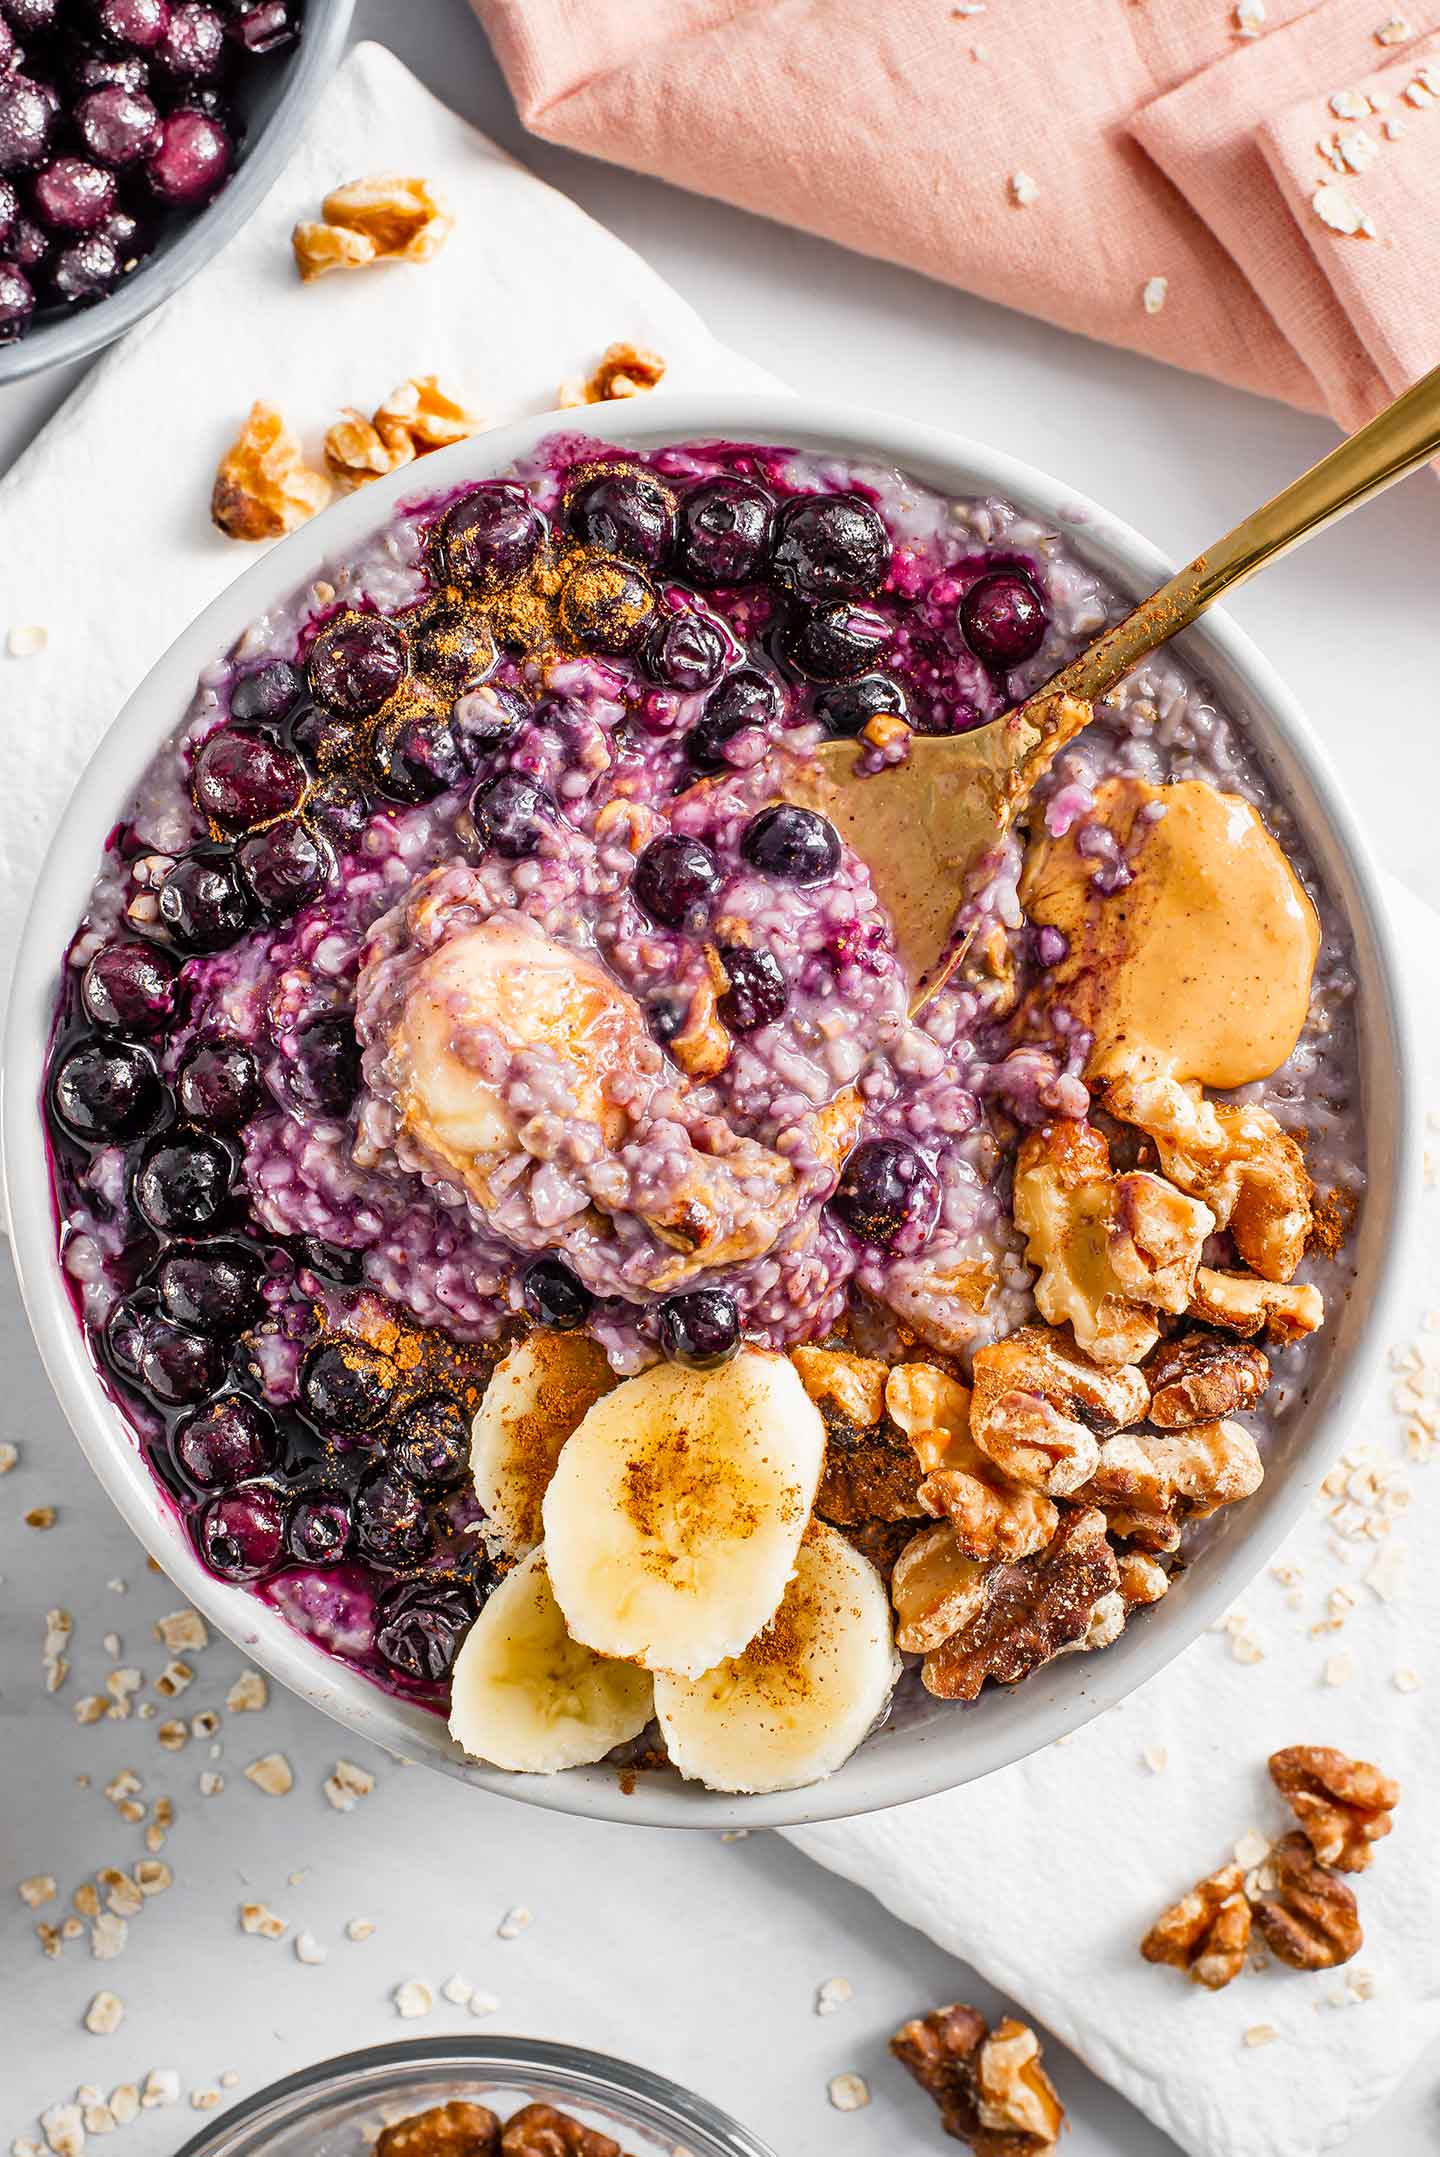 Top down view of a spoon scooping up purple oats from a loaded bowl of blueberry banana oatmeal. The top is decorated with extra blueberries, peanut butter, sliced banana, and toasted walnuts.